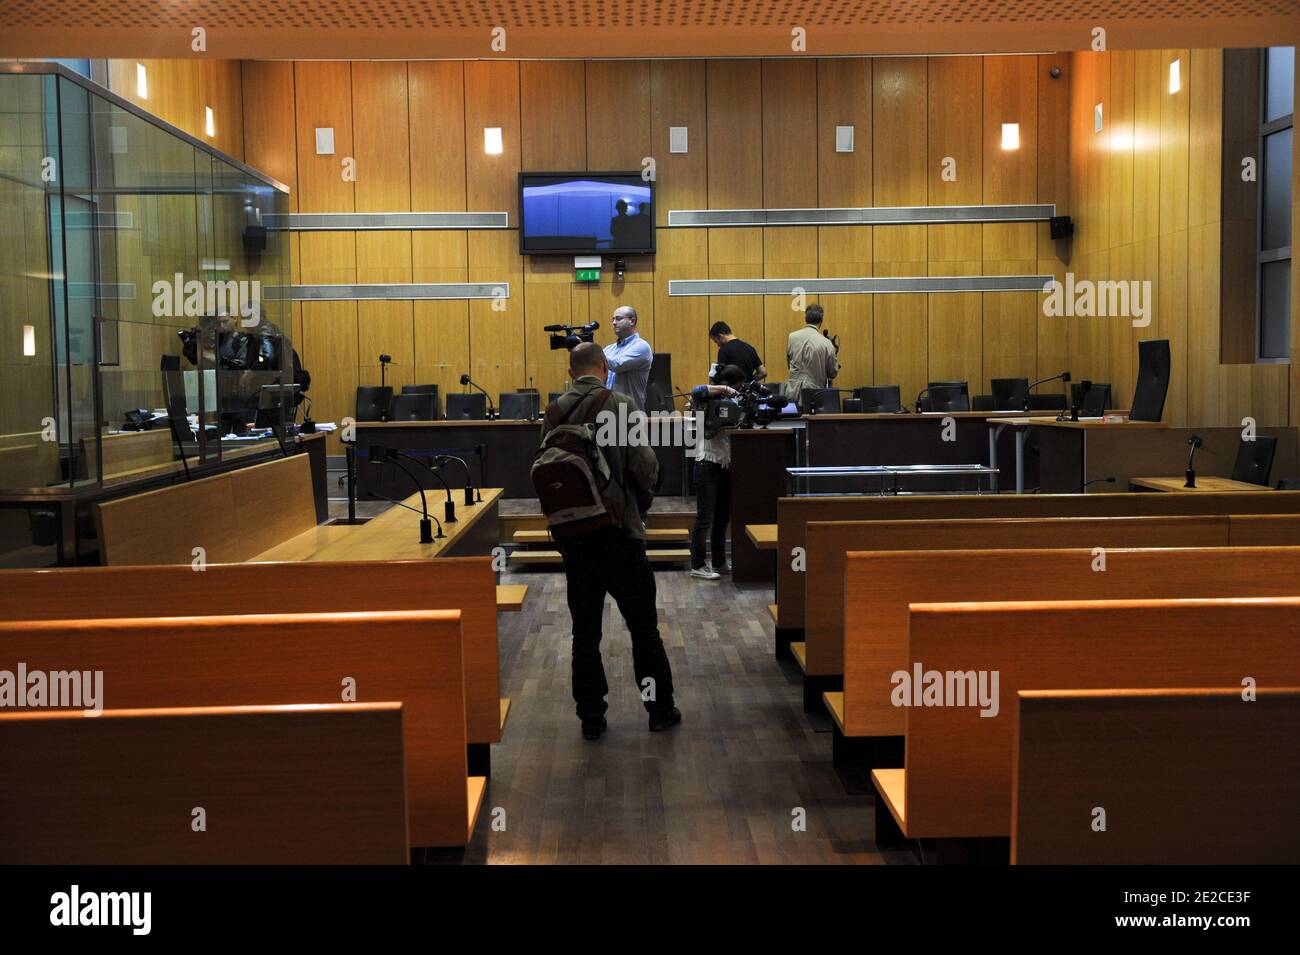 Atmosphere during German cardiologist Dieter Krombach's trial for the murder of Kalinka Bamberski, in Paris, France on October 4, 2011. The French court today decided to continue the trial of the German doctor, who is accused of having raped and killed his then 14-year-old stepdaughter, Kalinka Bamberski, in the summer of 1982 while she was holidaying with her mother at Krombach's home at Lake Constance, southern Germany. A court in Germany ruled that Krombach could not be held responsible for the death, but in 1995 a court in Paris found the doctor guilty of manslaughter and sentenced him in Stock Photo